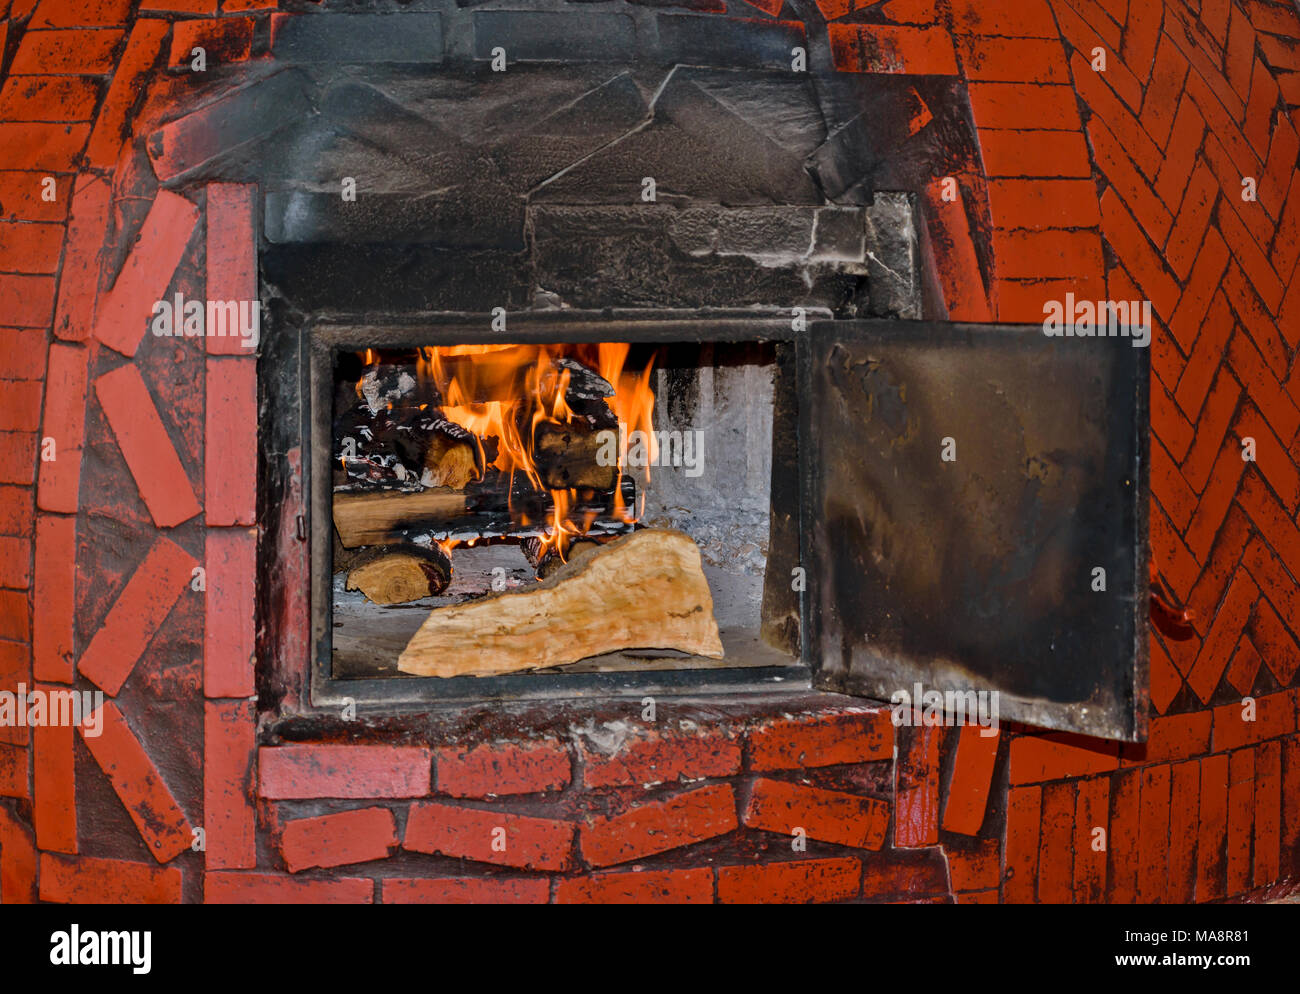 MOROCCO MARRAKECH PLACE JEMAA EL FNA THE WOOD FIRE INSIDE A PIZZA OVEN Stock Photo